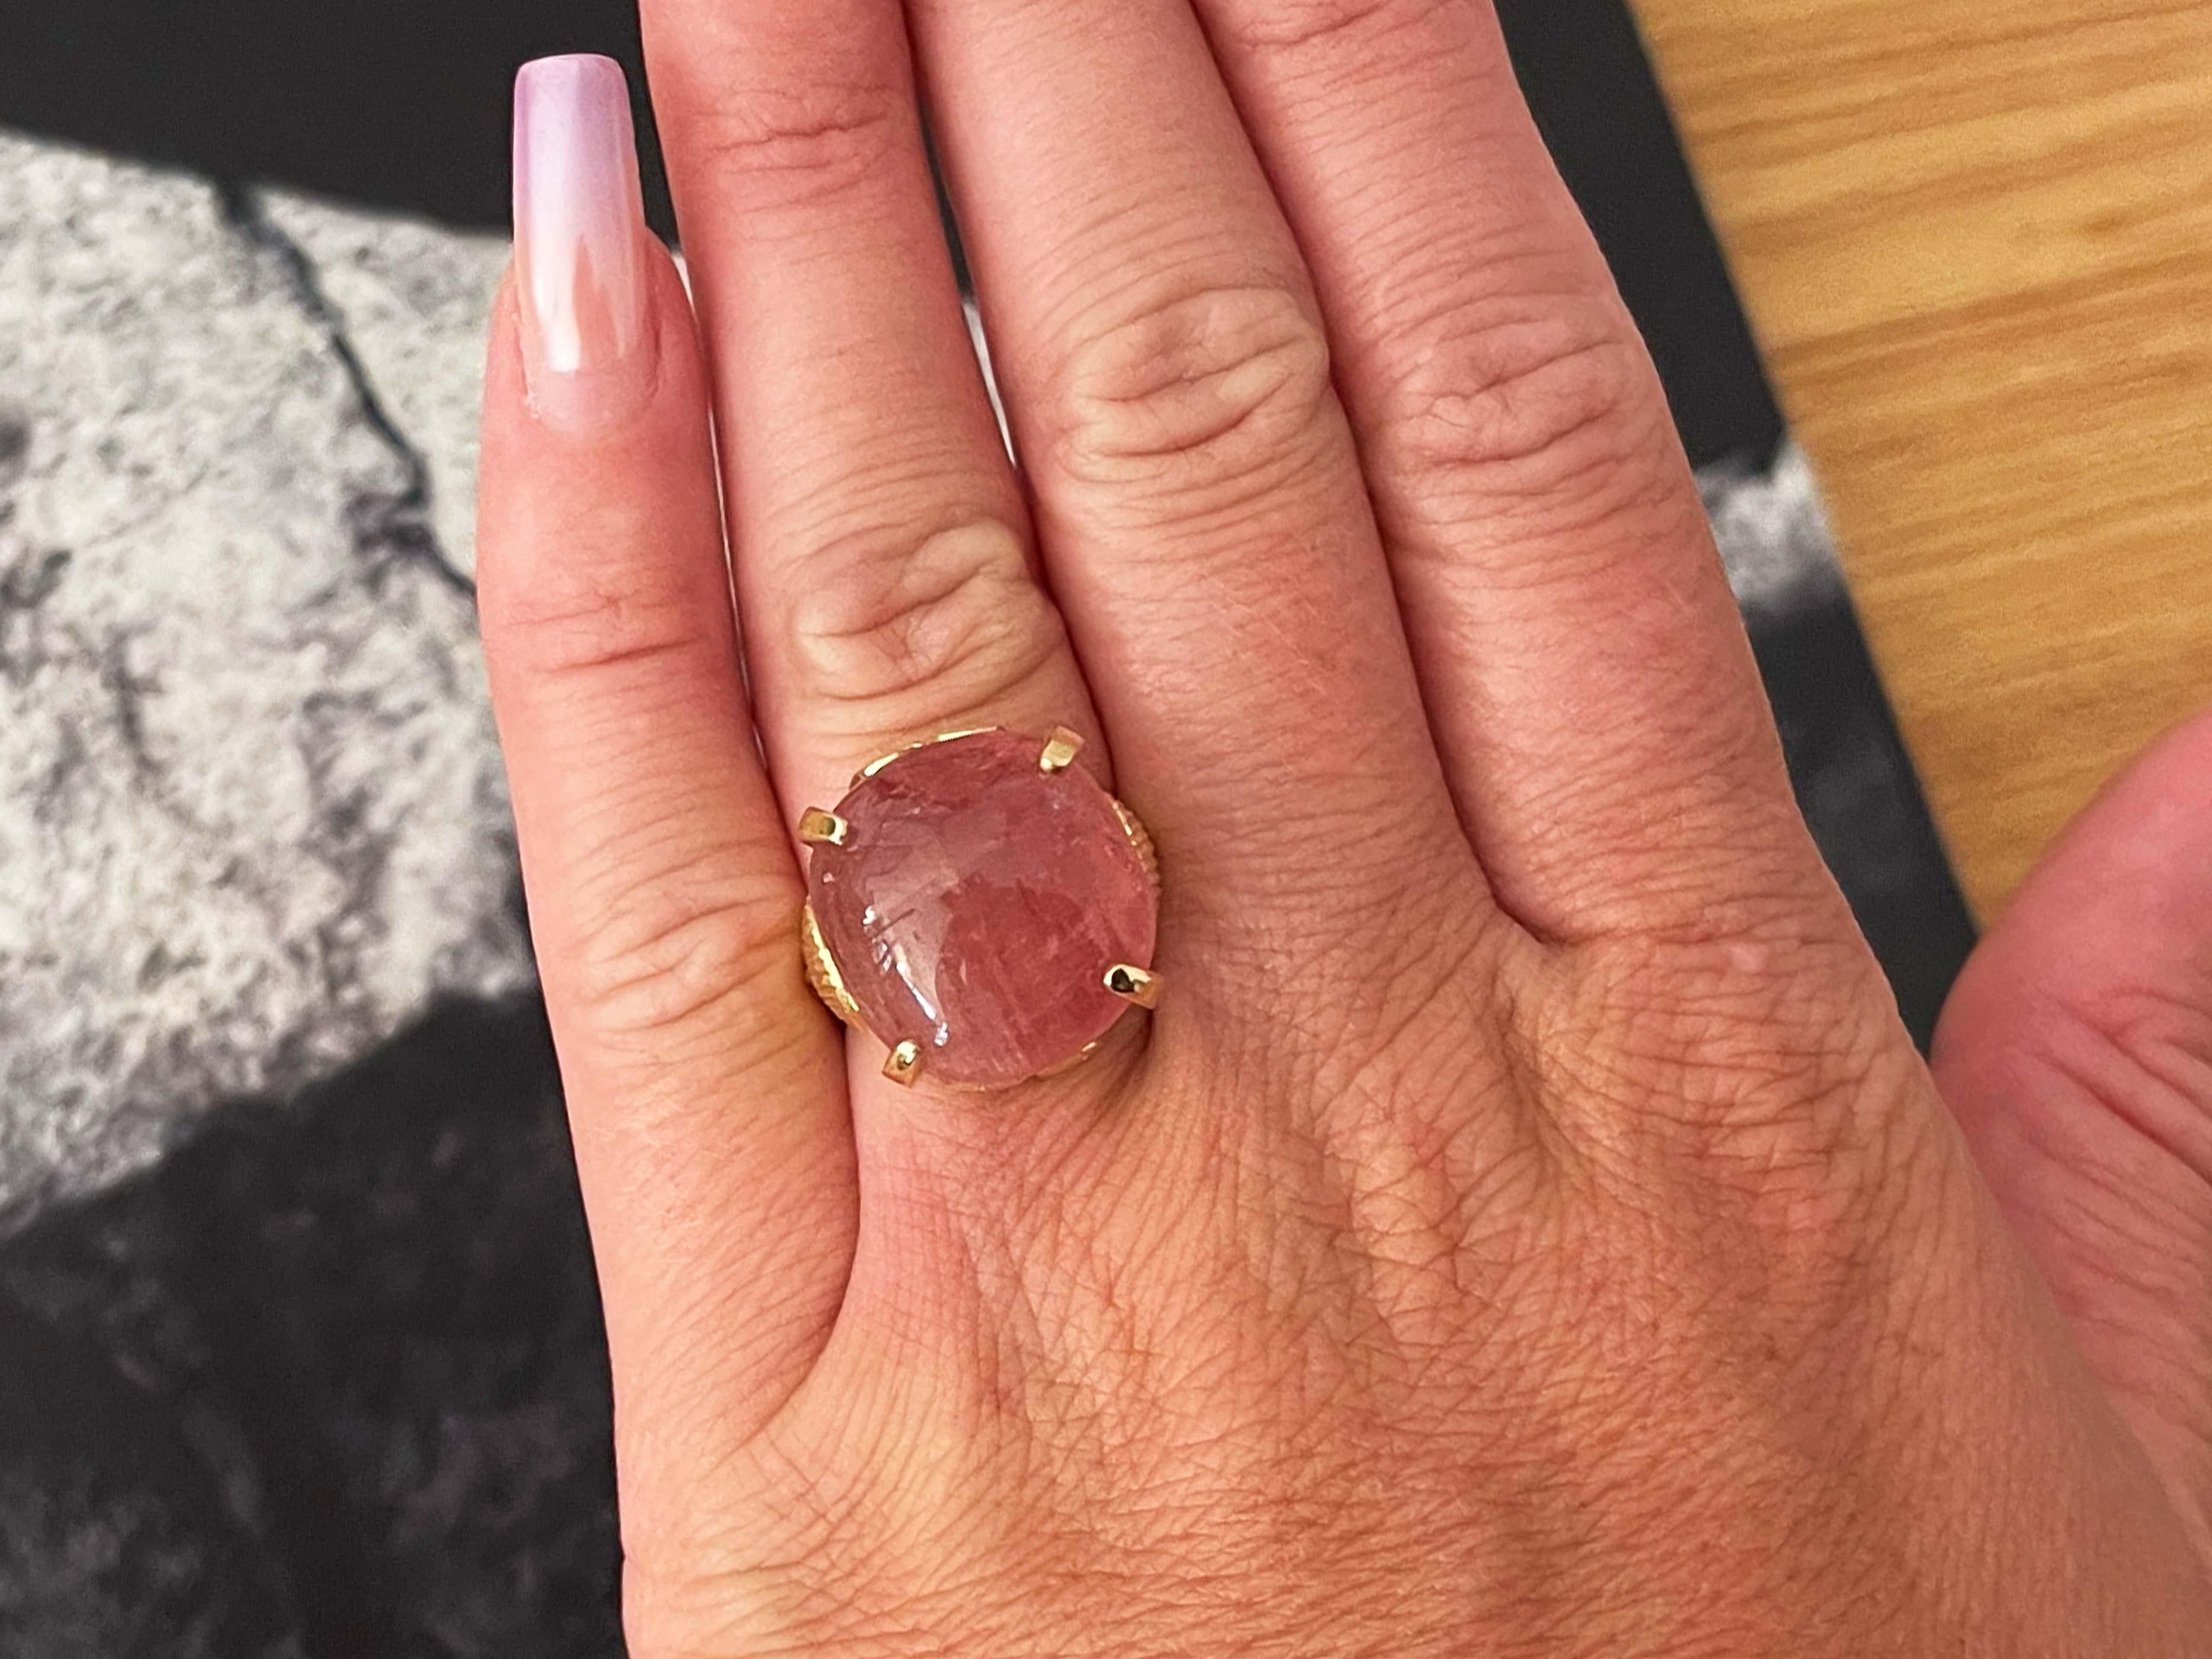 Item Specifications:

Metal: 14K Yellow Gold

Ring Size: 6

Total Weight: 14.2 Grams

Gemstone Specifications:

Gemstones: 1 pink tourmaline

Tourmaline Measurements: ~17.6 mm x 16.3 mm x 11 mm

Tourmaline Carat Weight: ~26 carats

Condition: